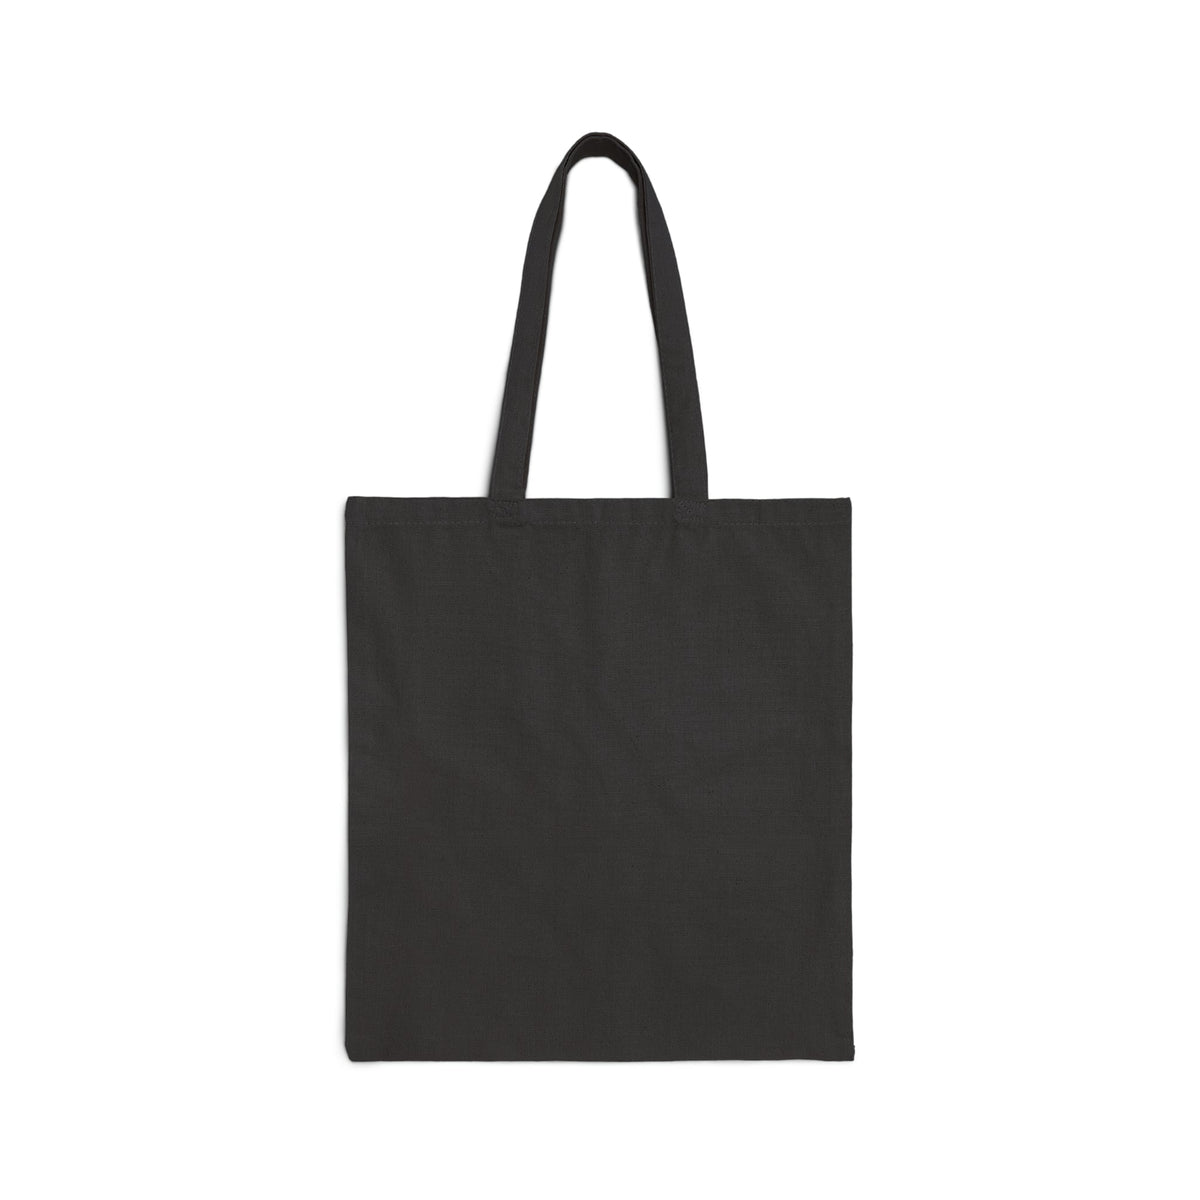 Support Local Farmers Tote Bag | Farmers Market Reusable Bags Bags TheFringeCultureCollective